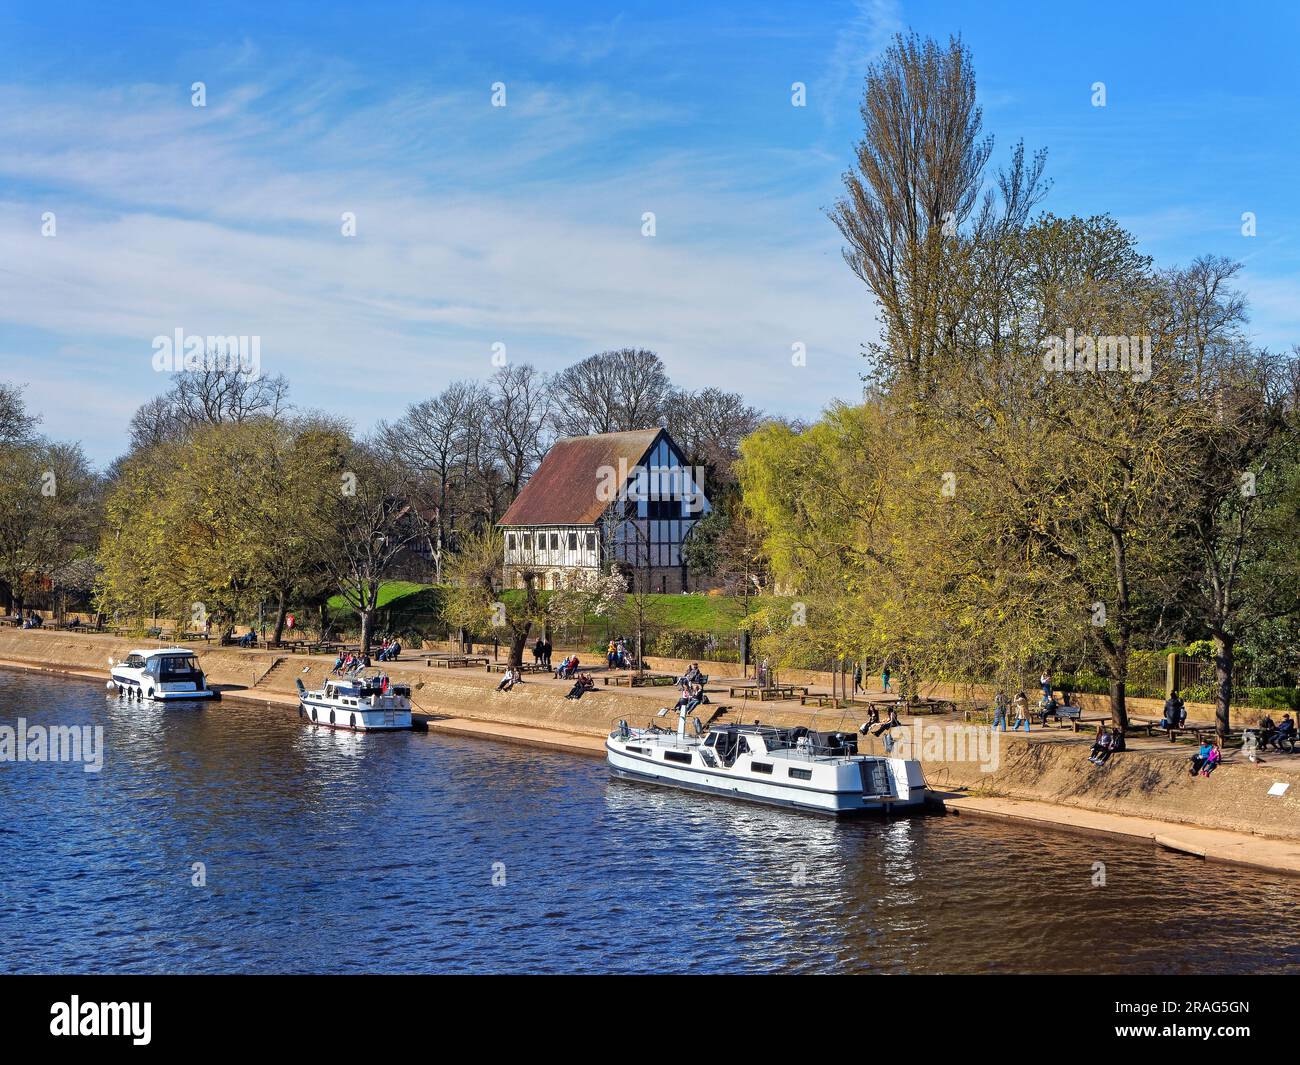 Großbritannien, North Yorkshire, York, Museum Gardens and Boats on River Ouse Stockfoto